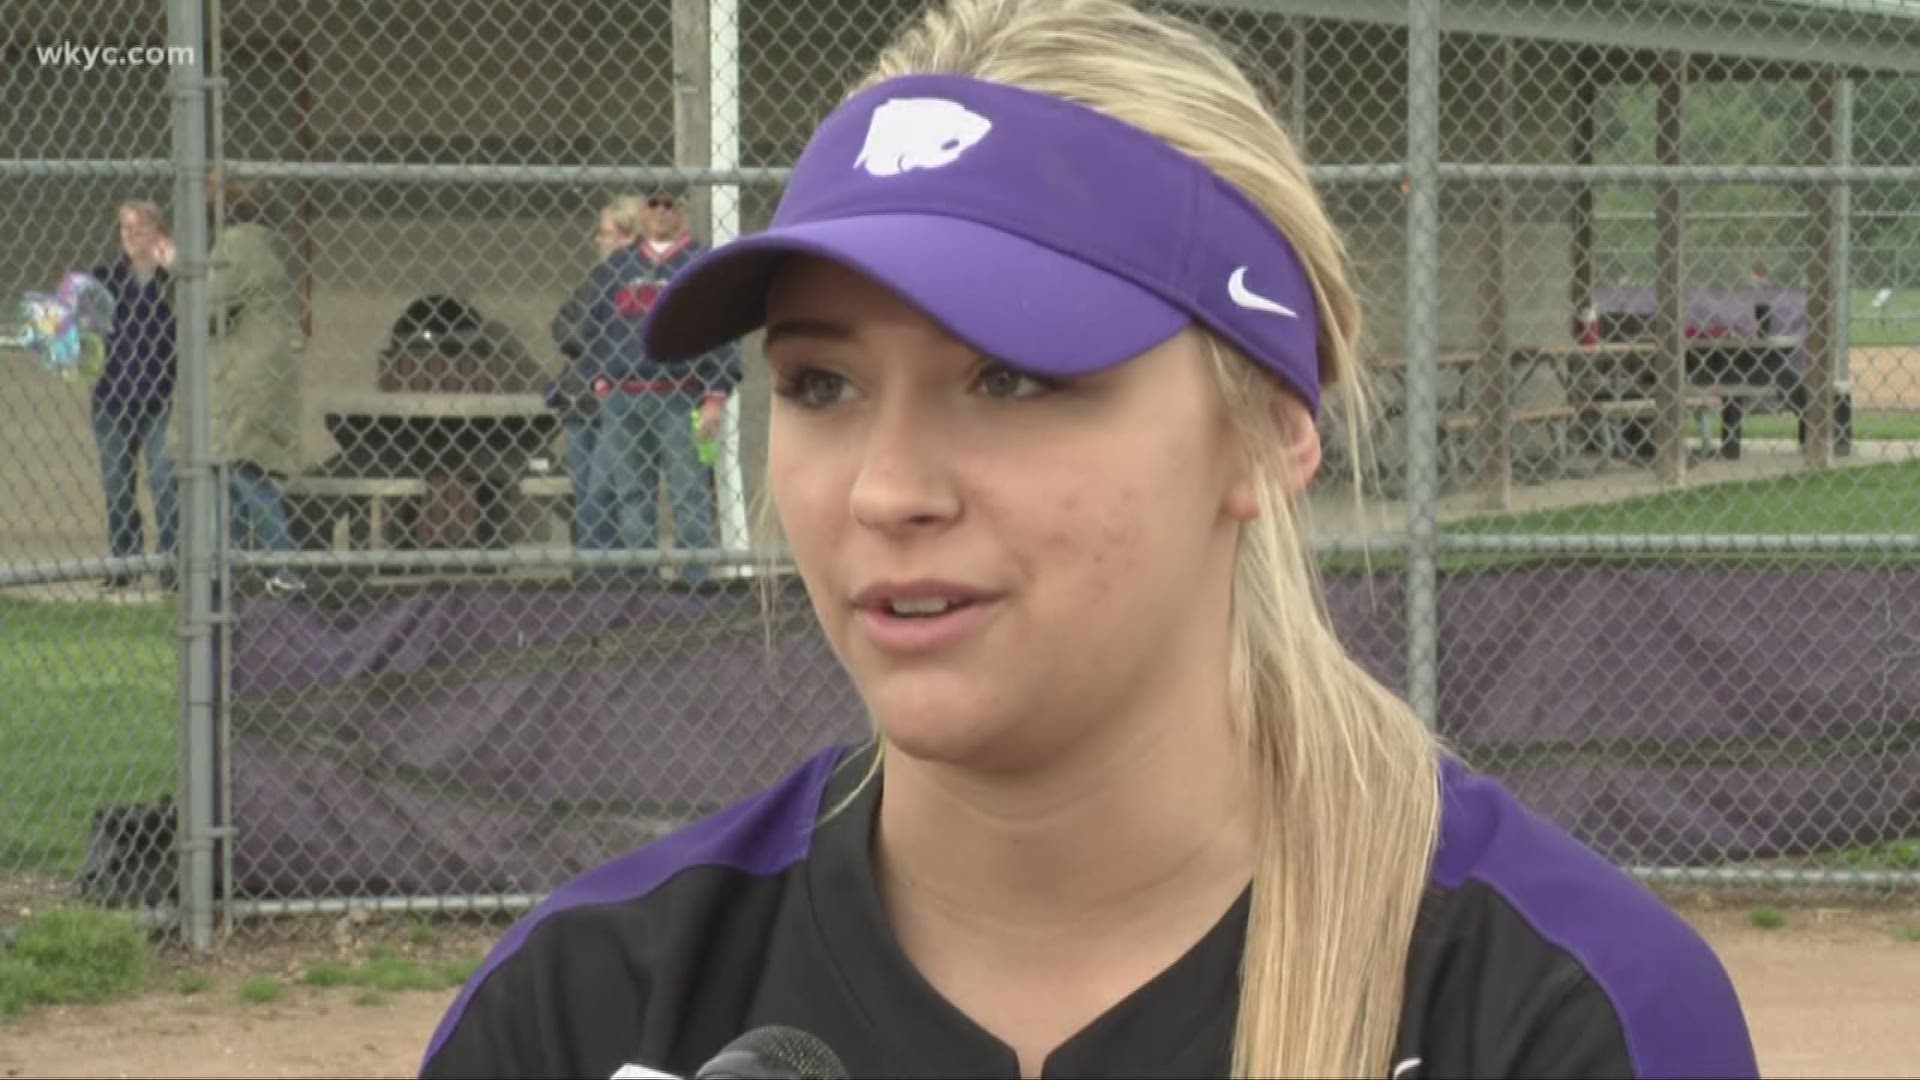 Lorain County softball pitcher breaks state record